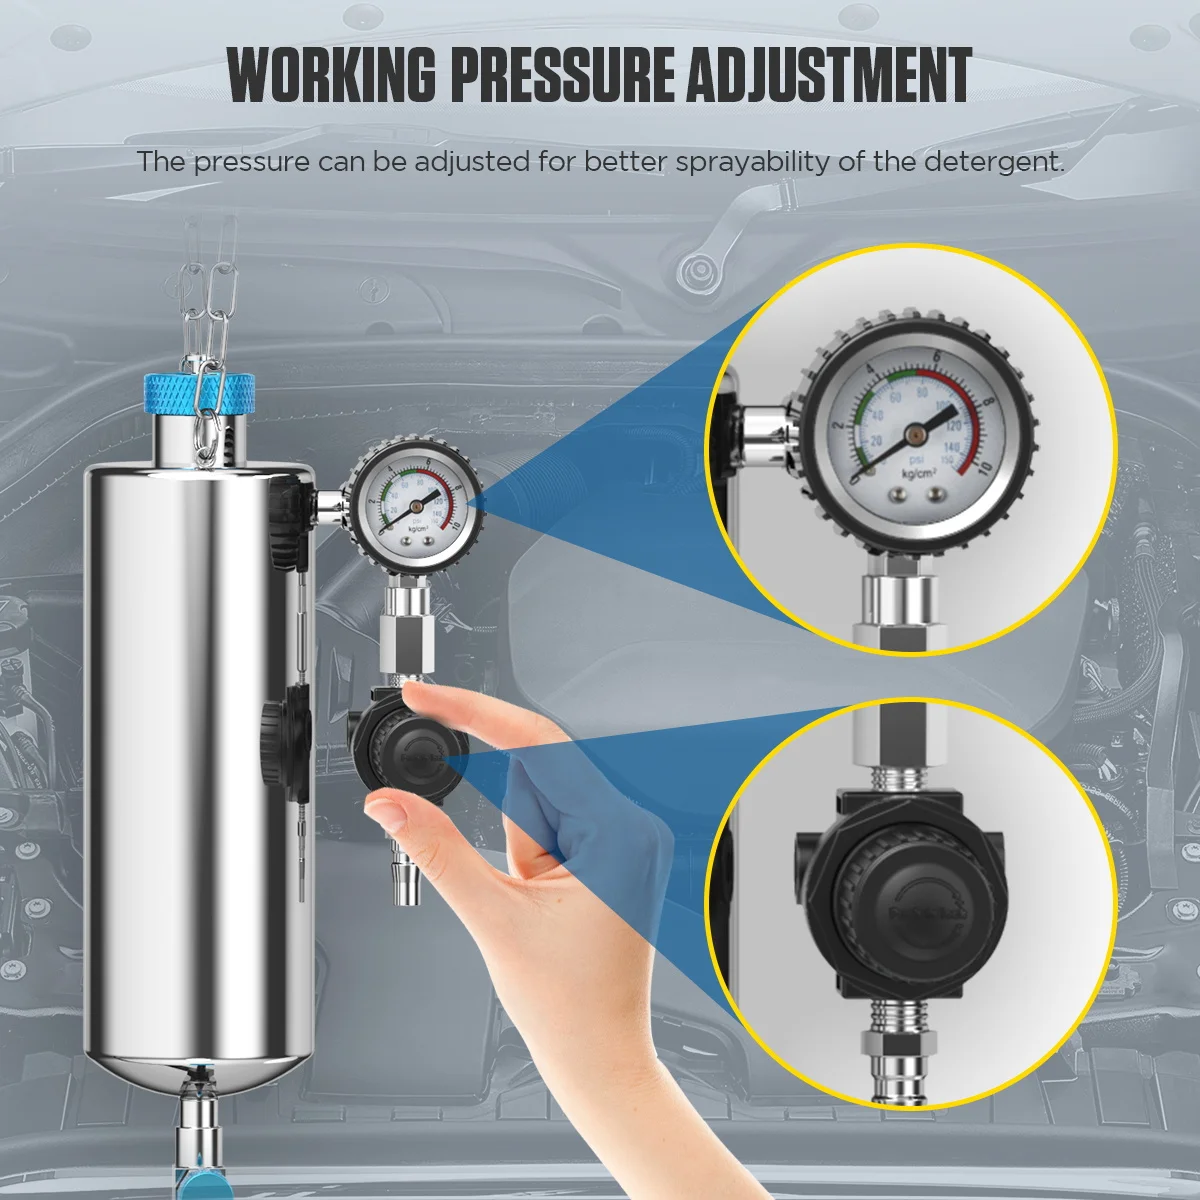 Like the image shows, this is how you can adjust the working pressure on the Fuel Injector Cleaning Machine